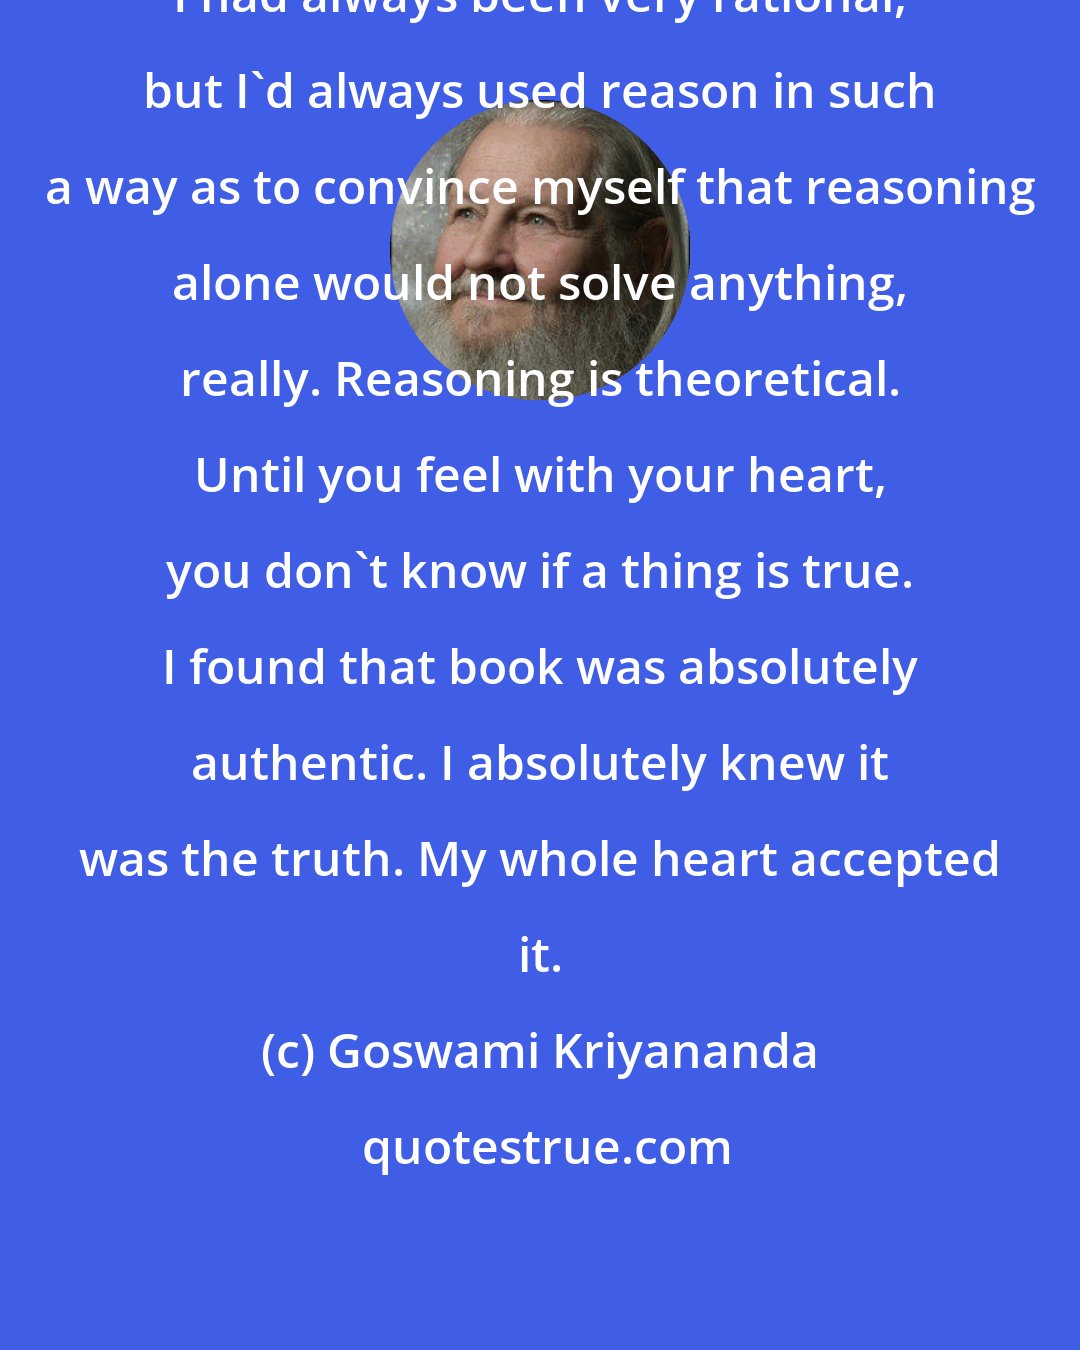 Goswami Kriyananda: I had always been very rational, but I'd always used reason in such a way as to convince myself that reasoning alone would not solve anything, really. Reasoning is theoretical. Until you feel with your heart, you don't know if a thing is true. I found that book was absolutely authentic. I absolutely knew it was the truth. My whole heart accepted it.